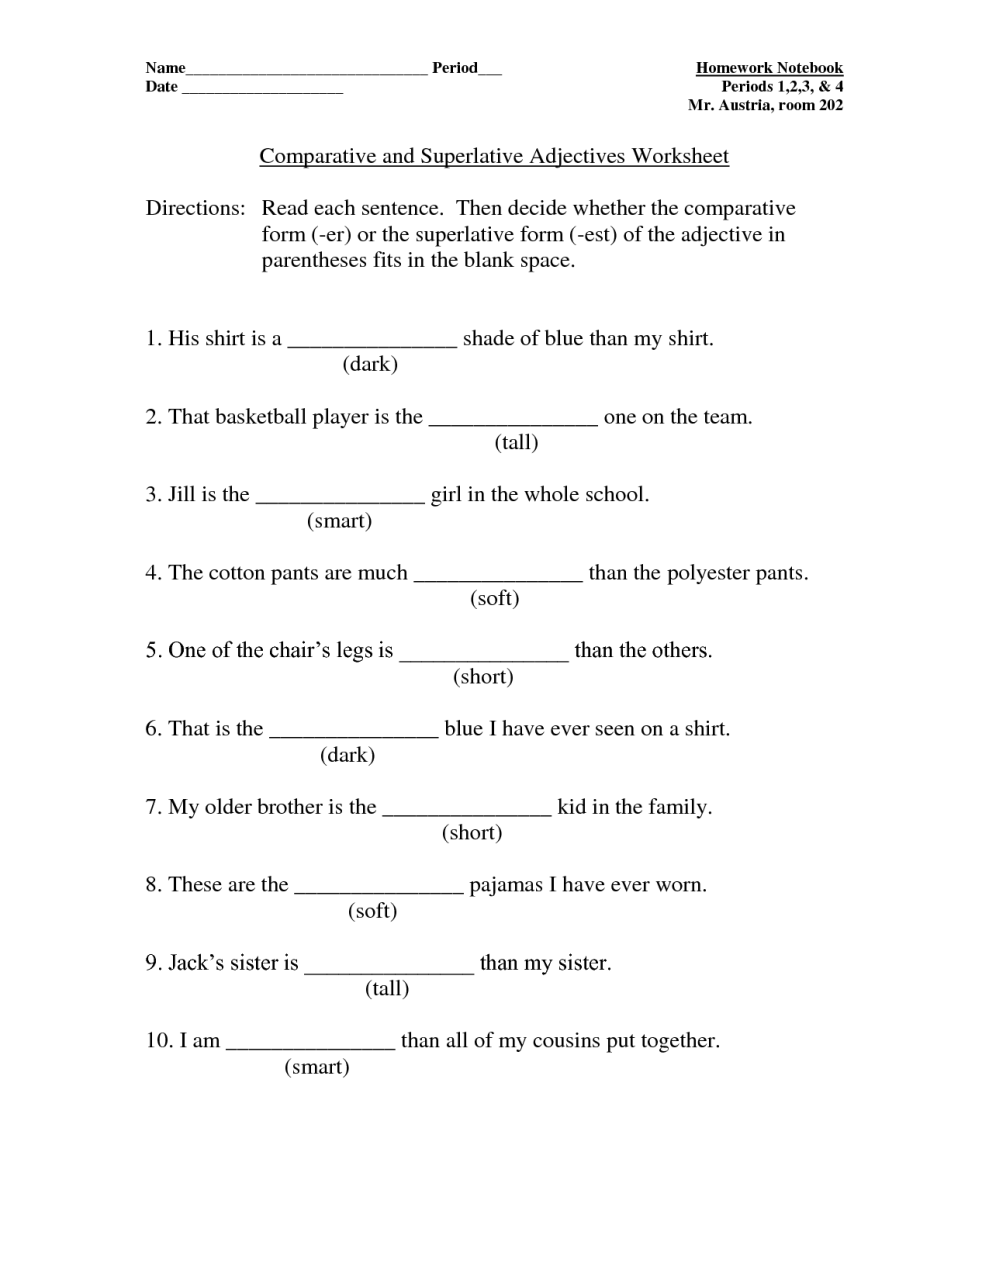 Comparative Adjectives Worksheet Answers